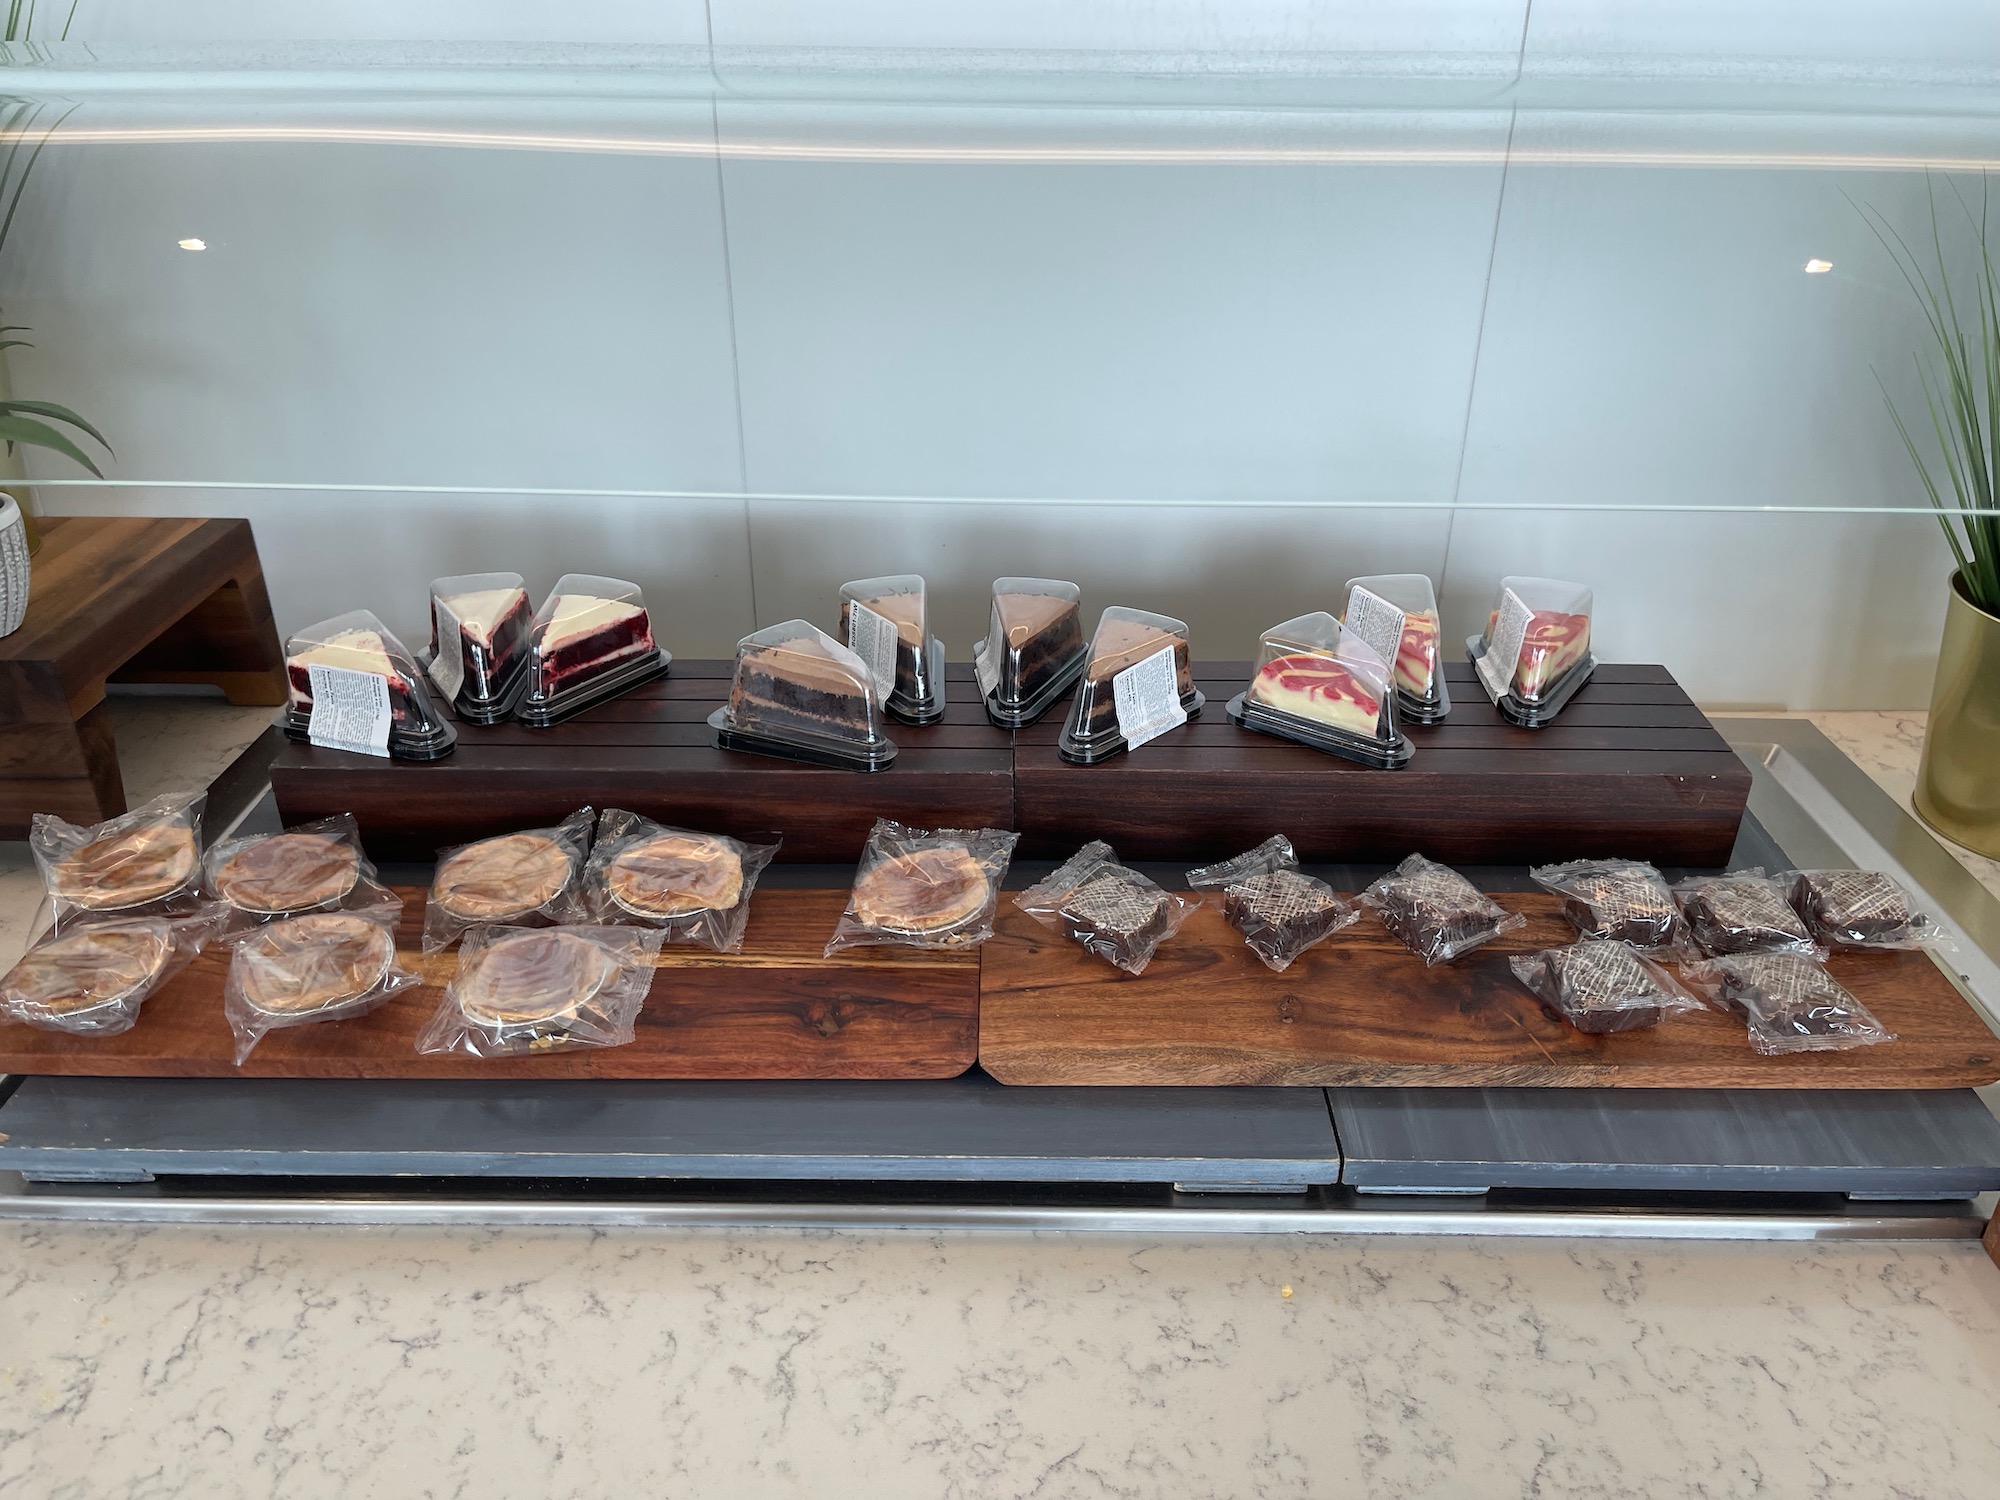 a display of cakes and desserts